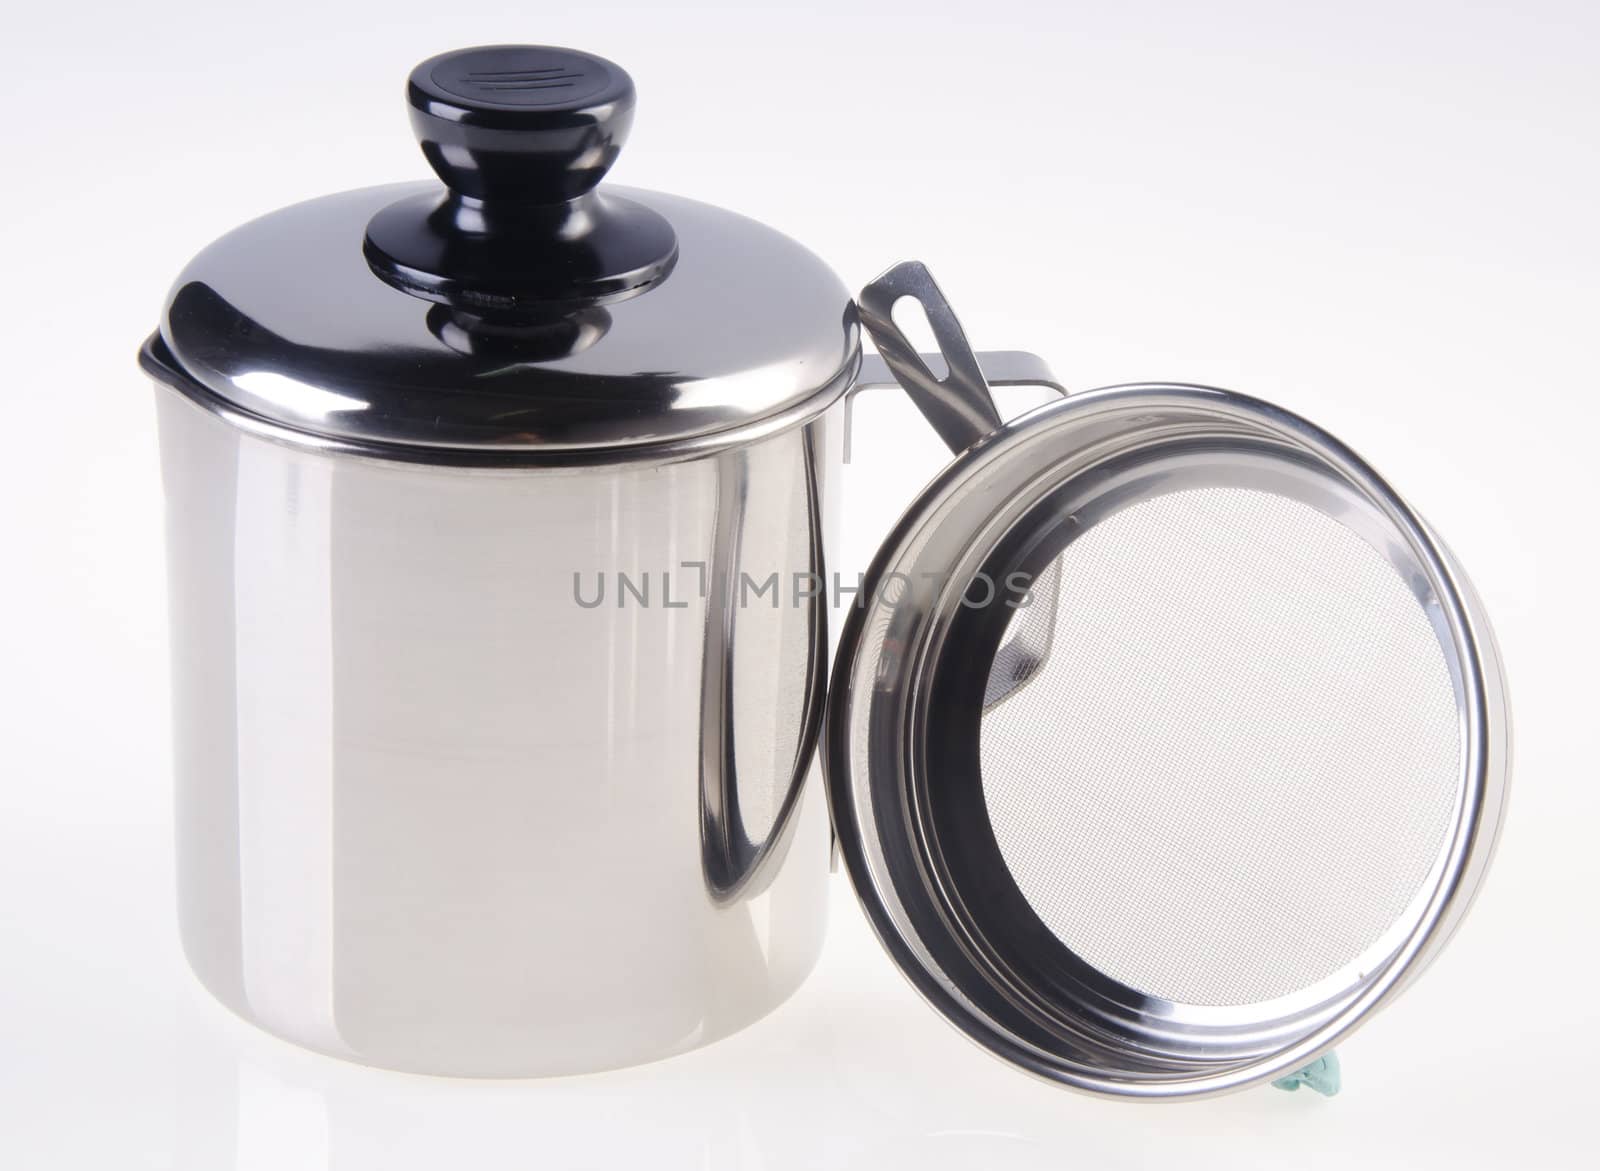 pot, Stainless steel pot on white background by heinteh